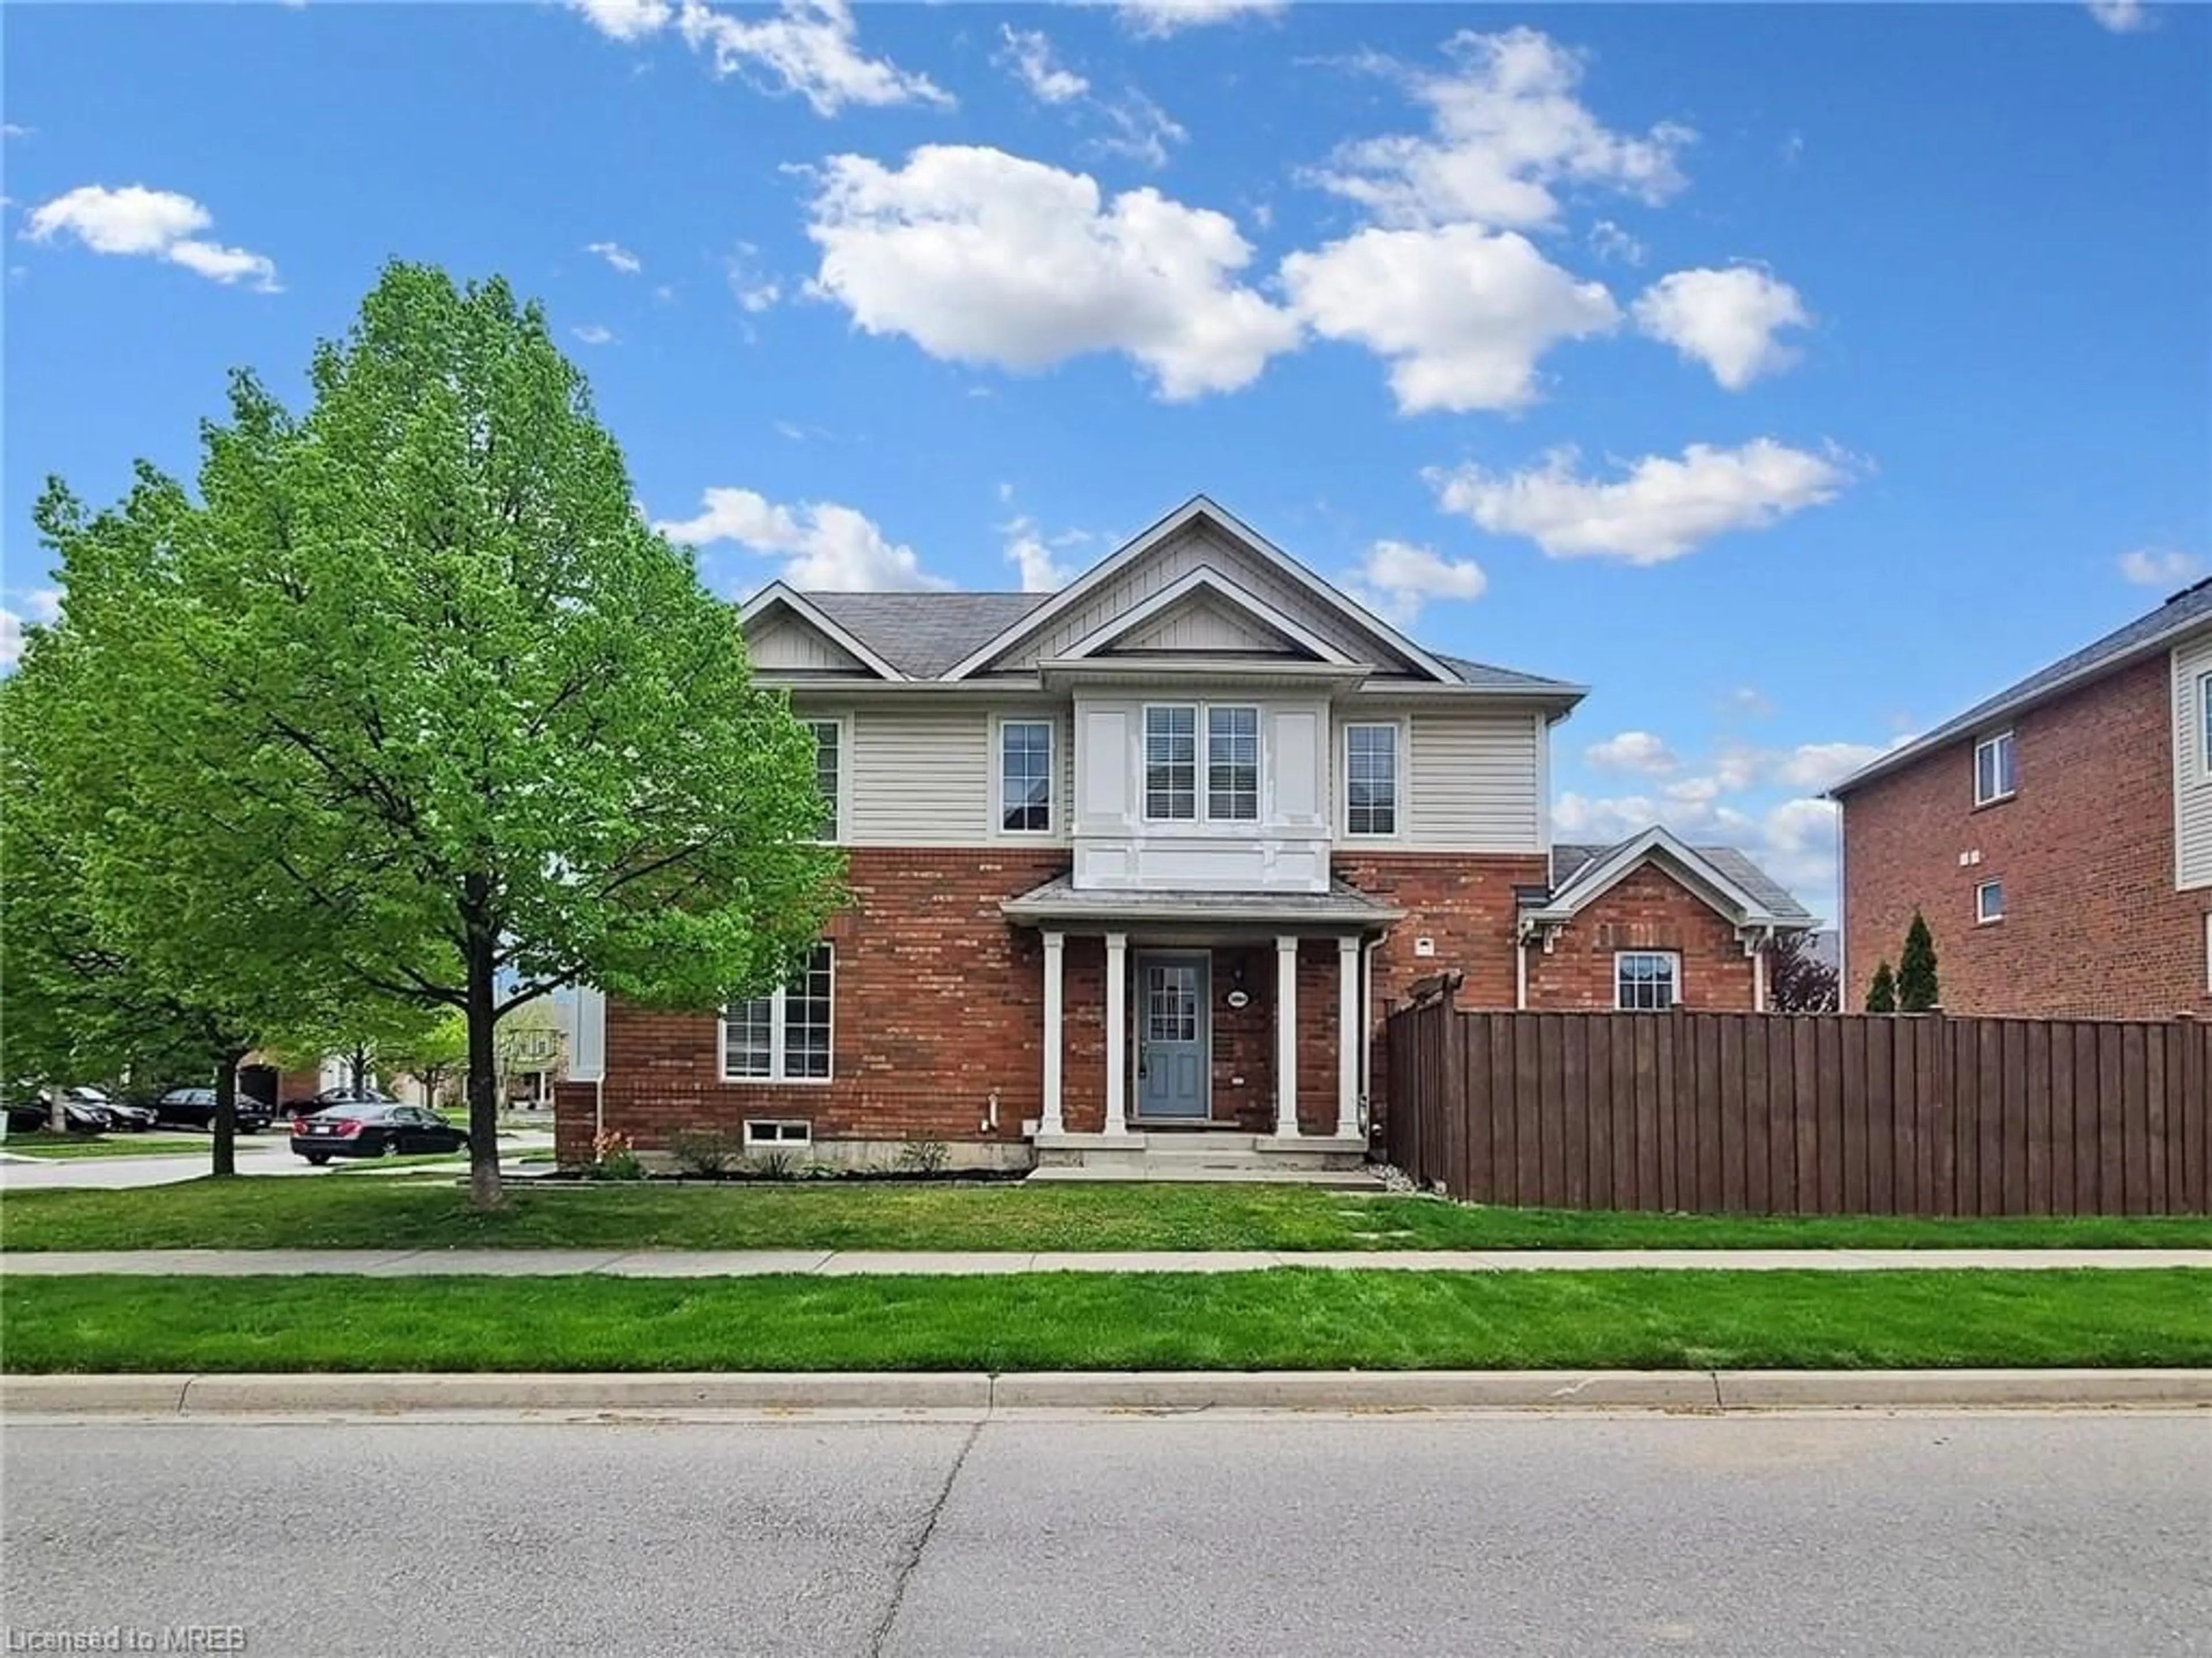 Frontside or backside of a home for 3064 Stornoway Cir, Oakville Ontario L6M 5H7